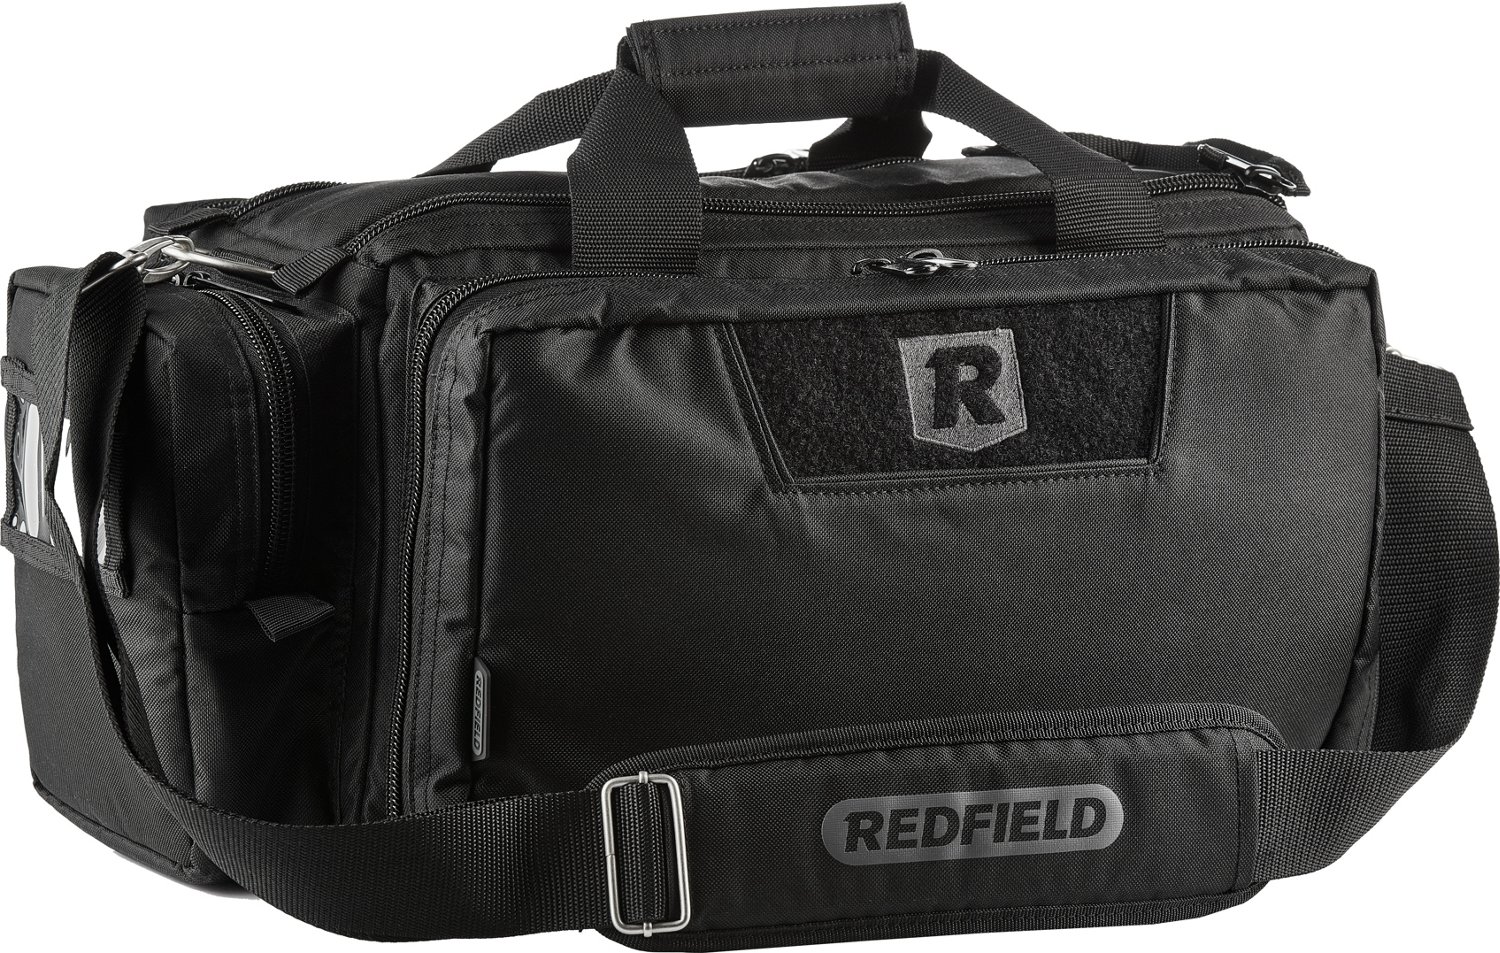 Redfield Competition Range Bag